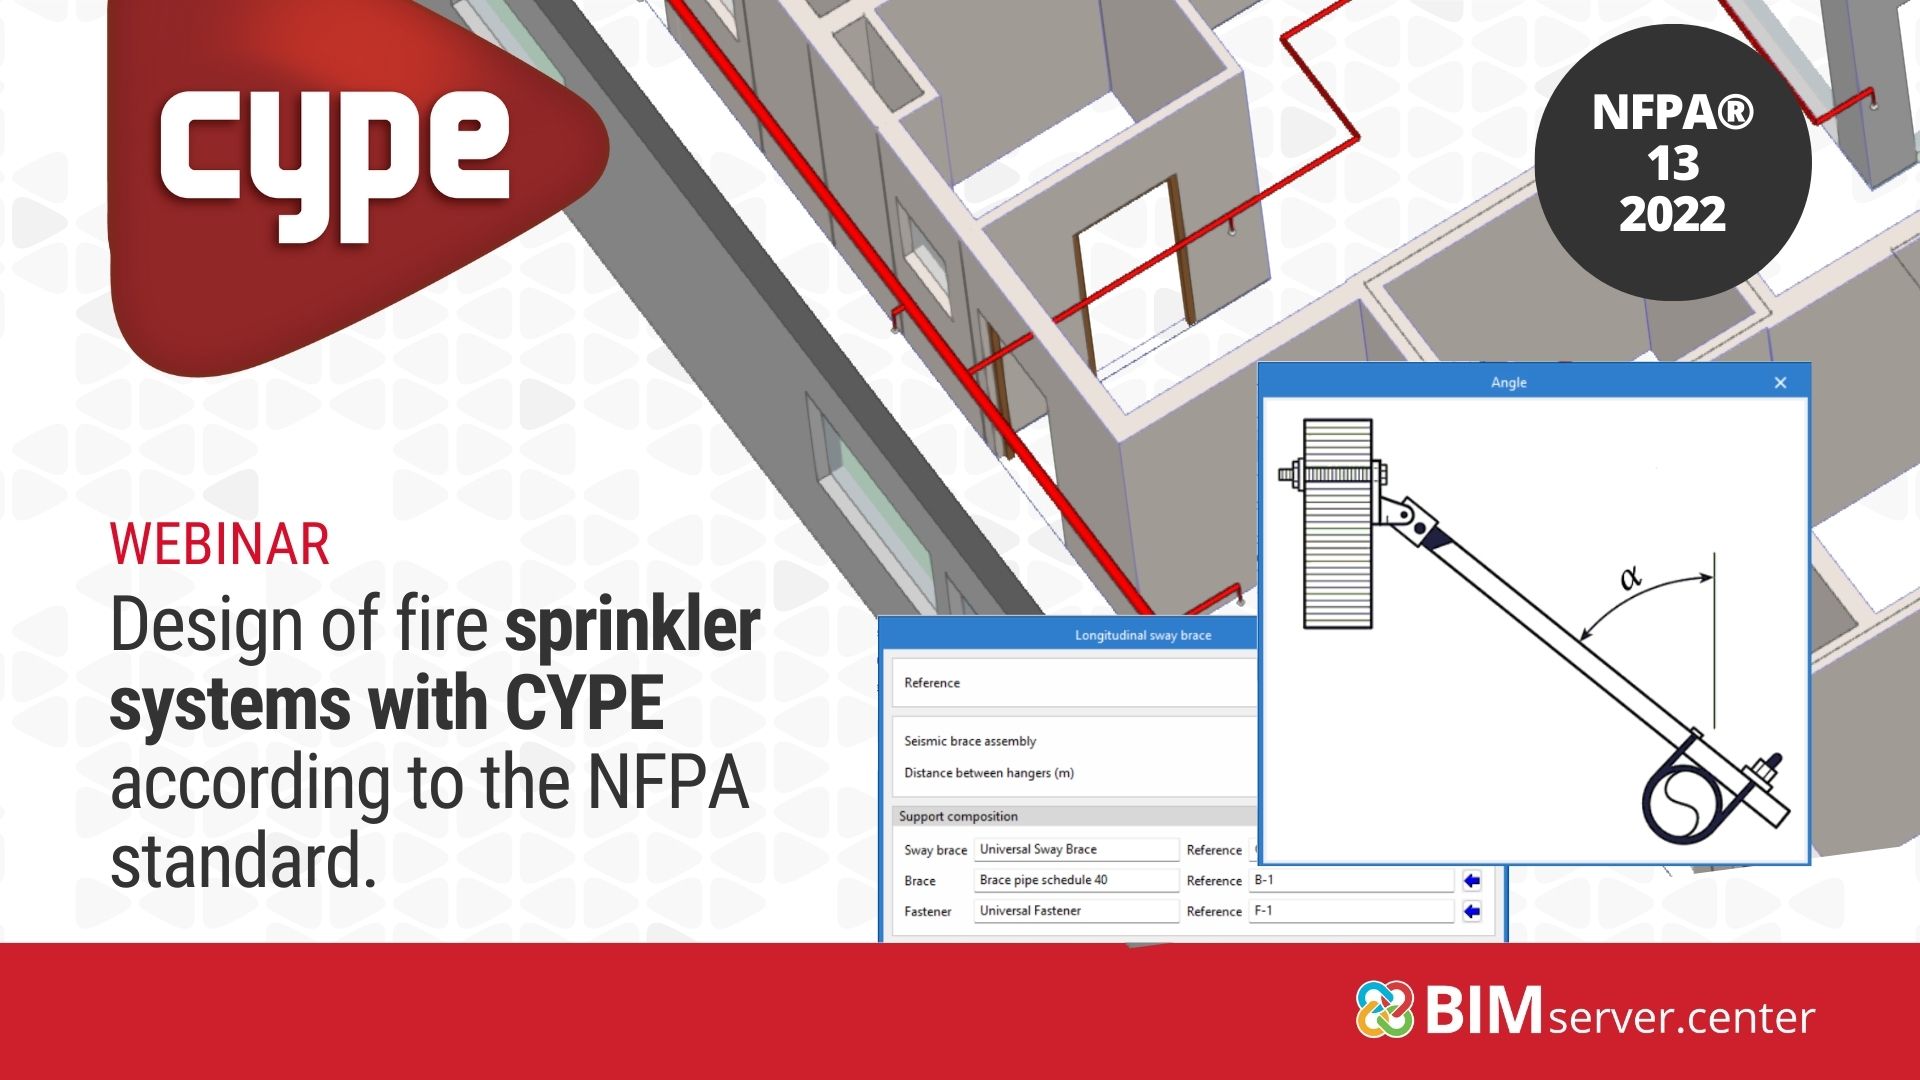 Components Of A Fire Sprinkler System - BuildOps